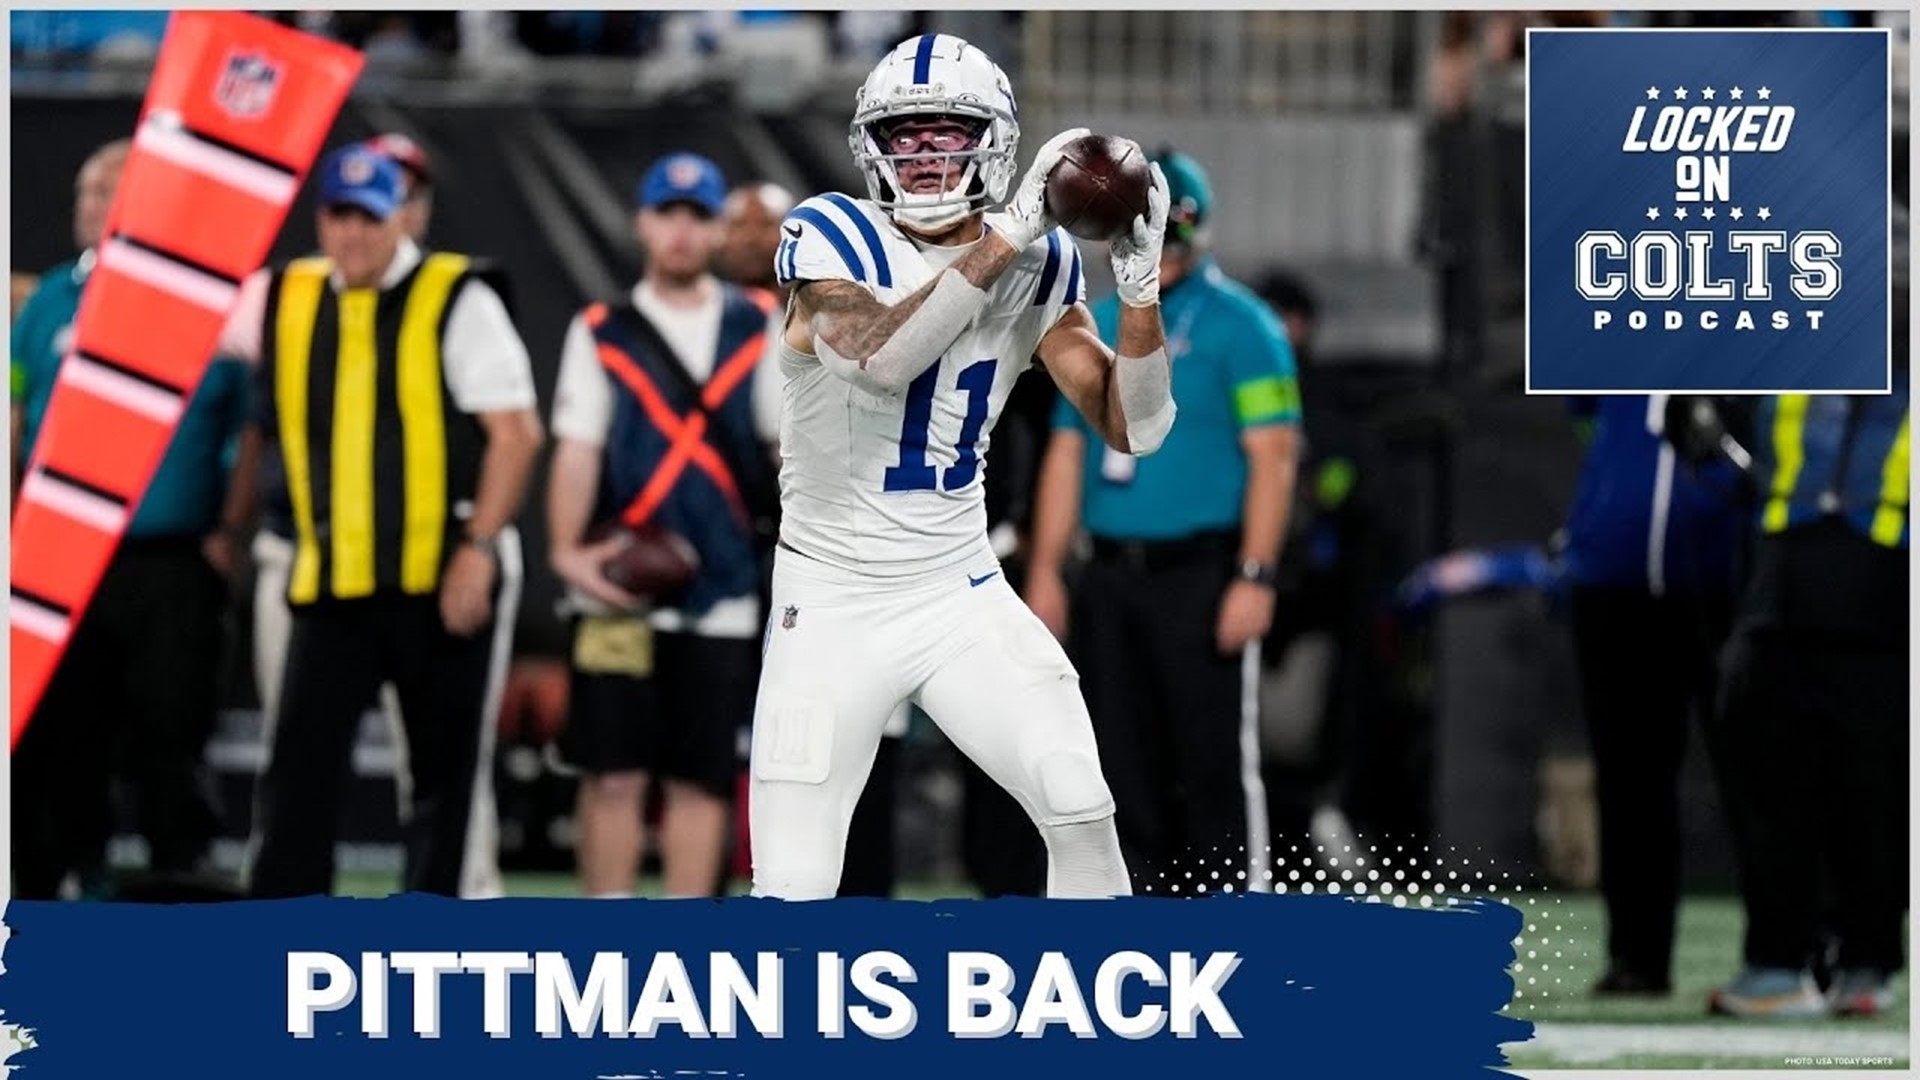 The Indianapolis Colts have officially locked Michael Pittman Jr. in for the upcoming season.